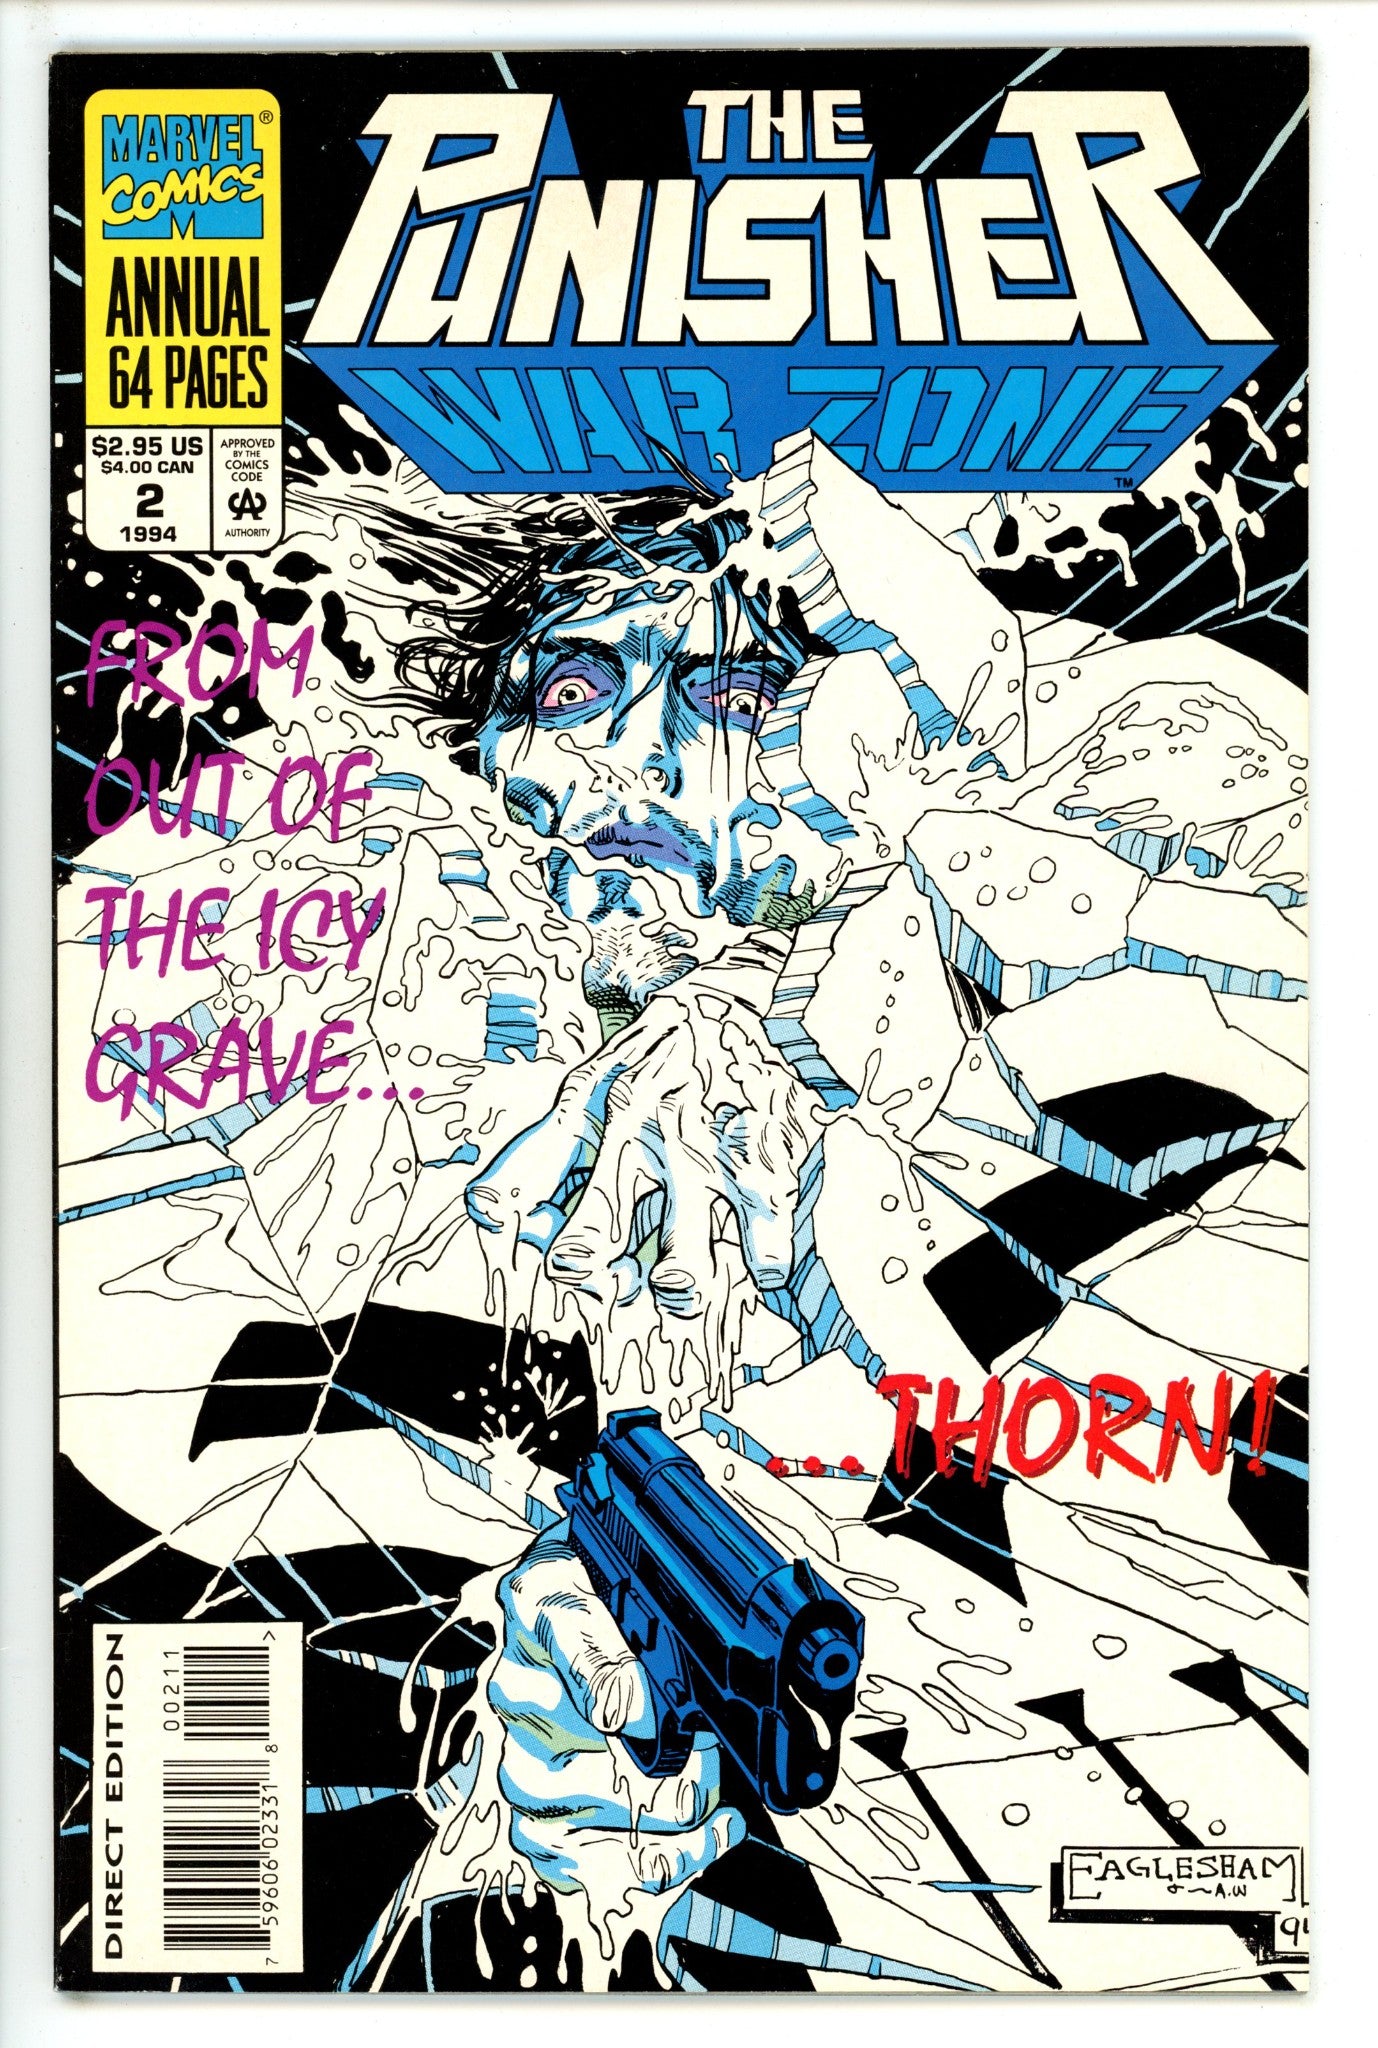 The Punisher: War Zone Annual Vol 1 2 (1994)